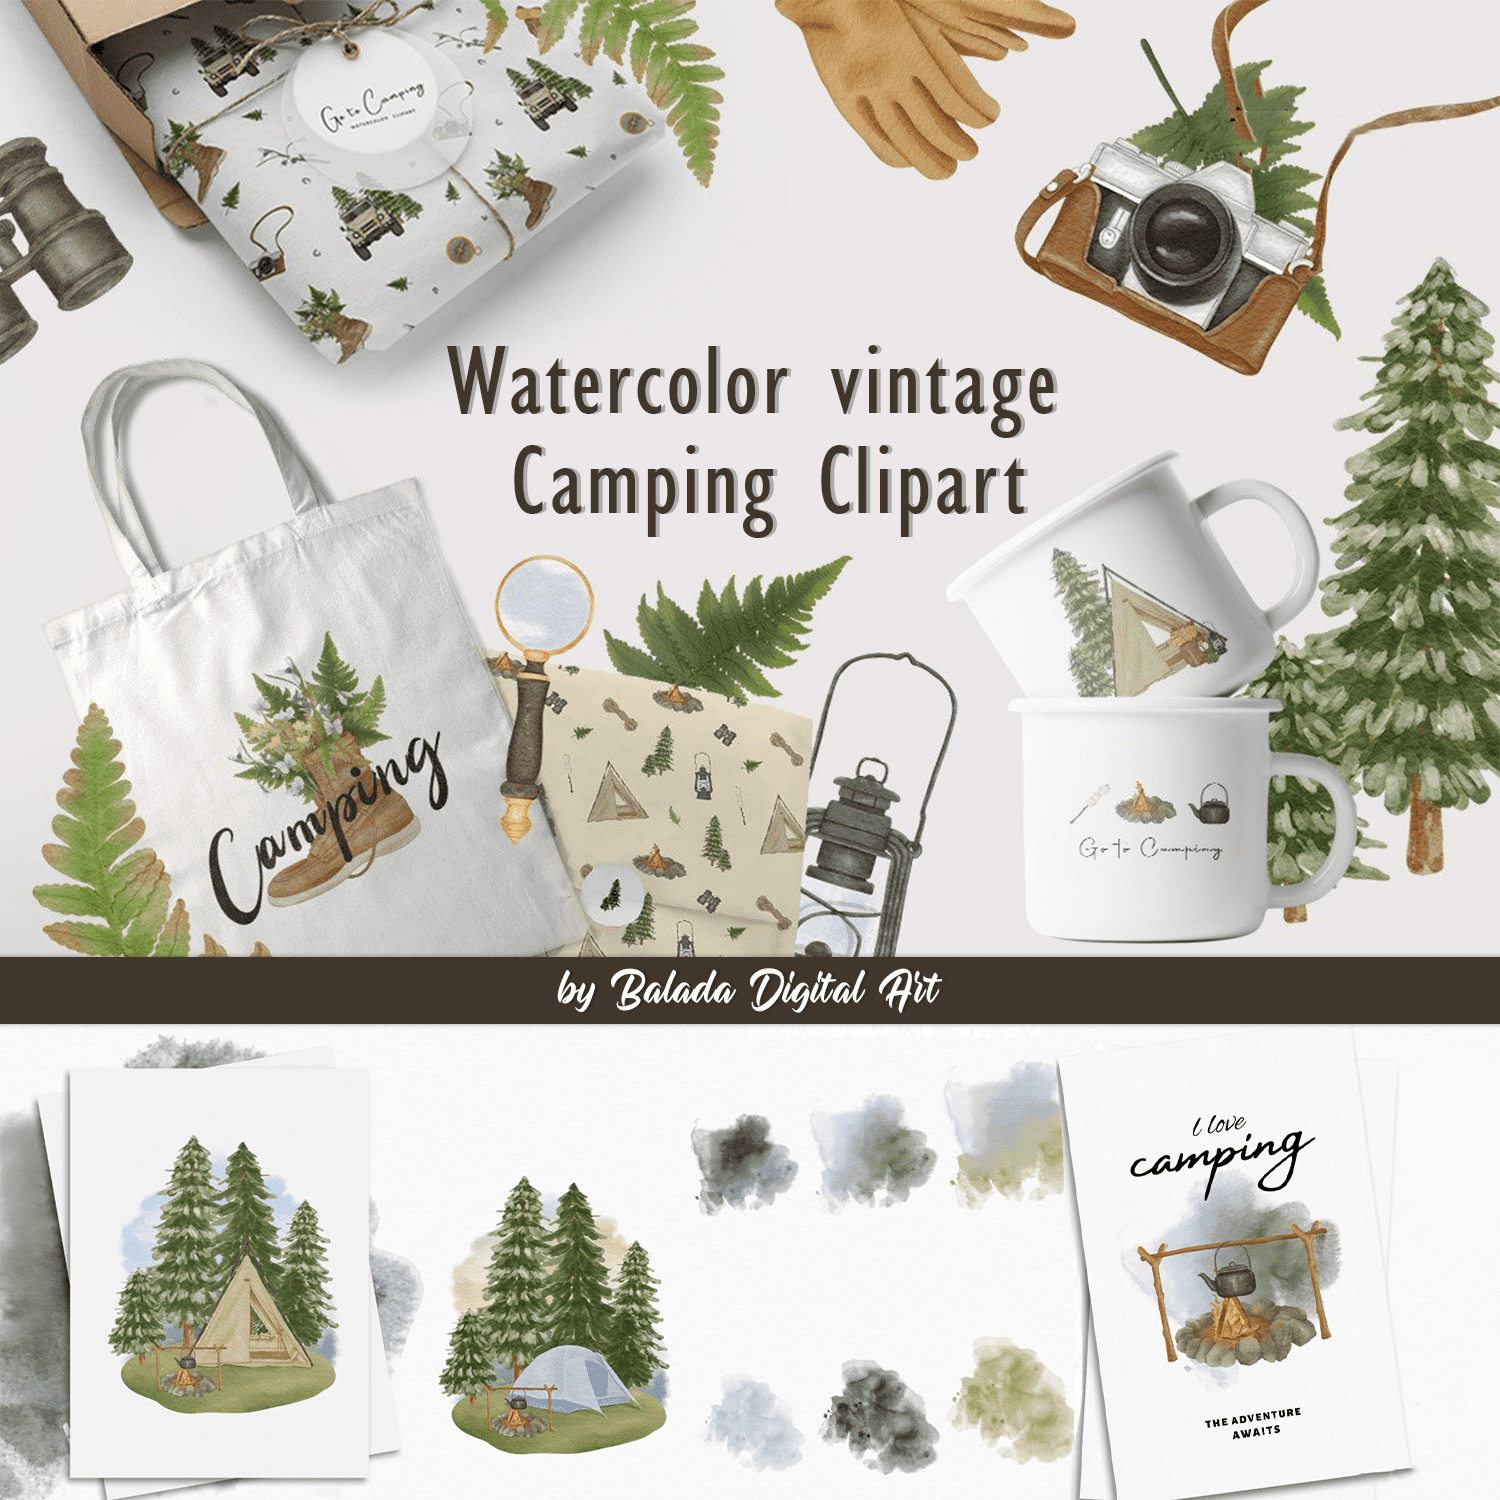 Watercolor vintage Camping Clipart cover.